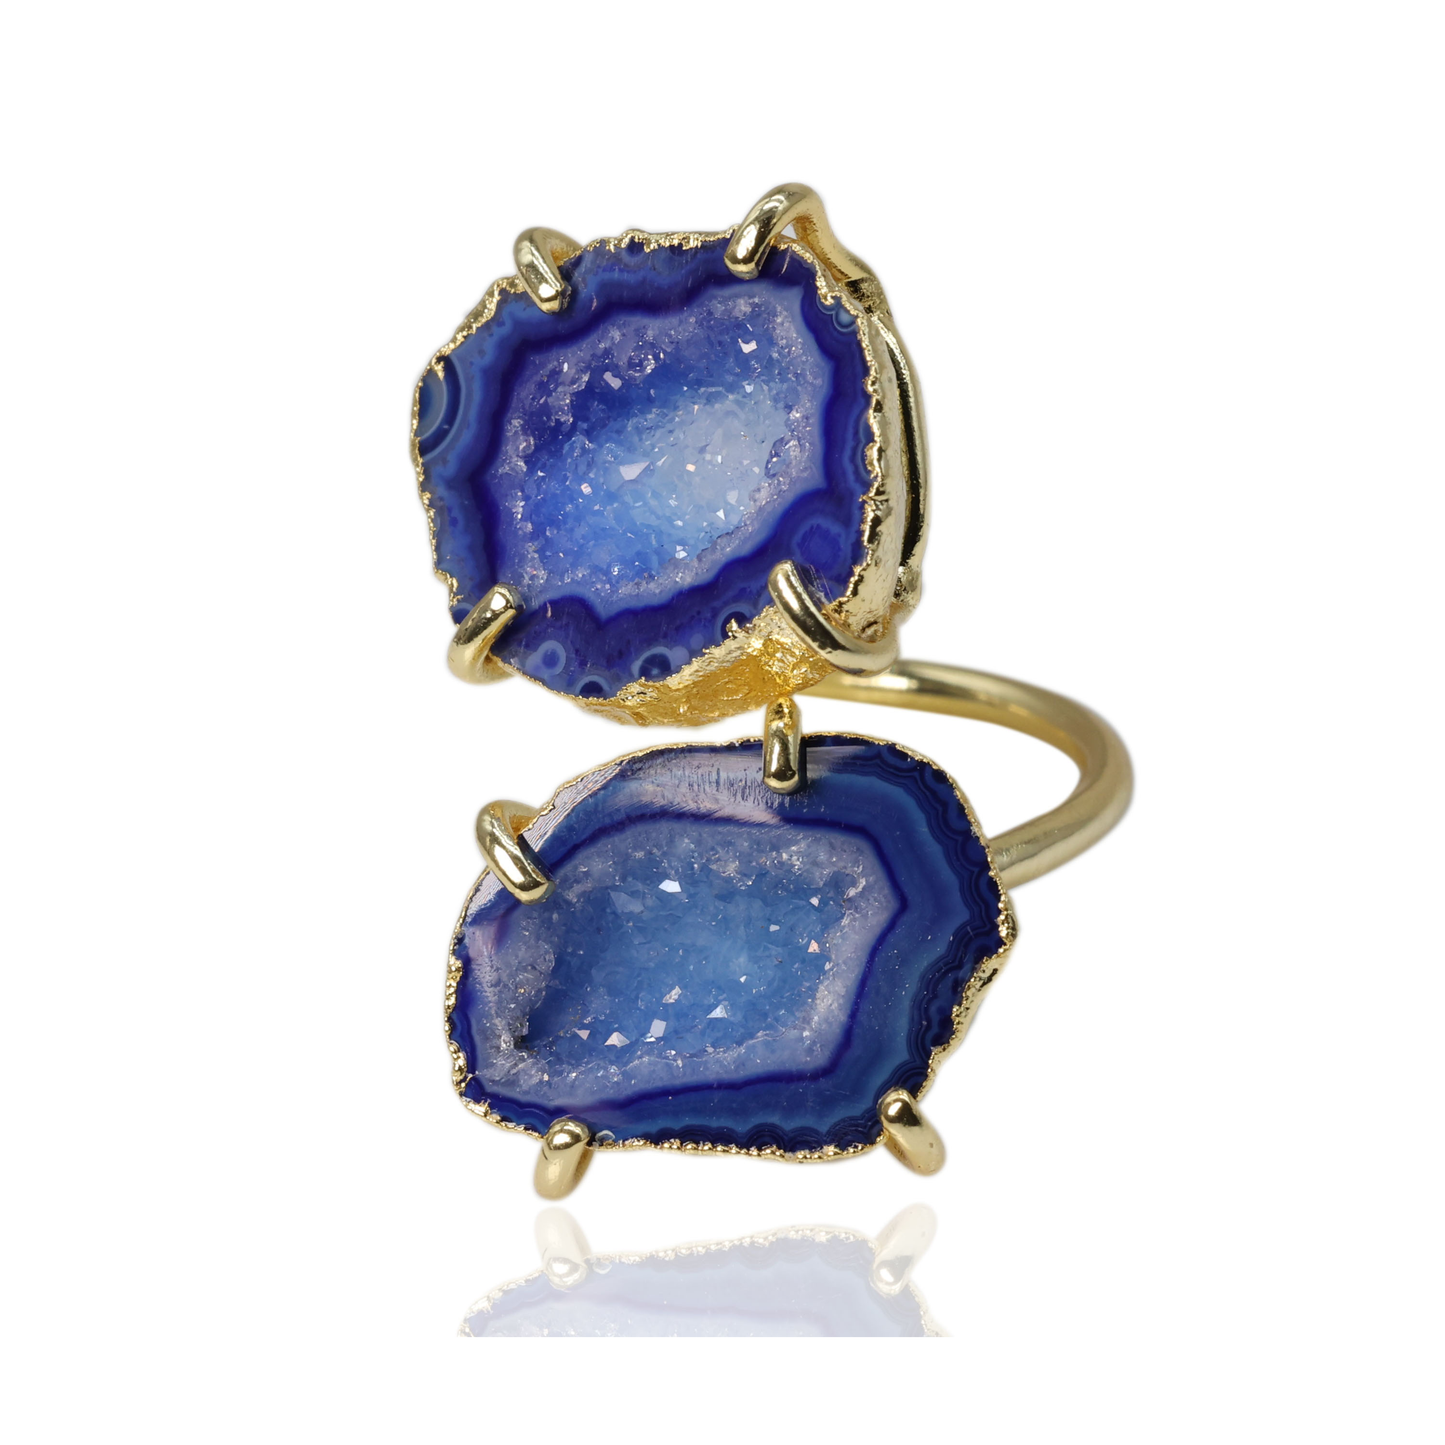 Twins Two Geode Gemstone Rings Prong Set 15 - 25 MM